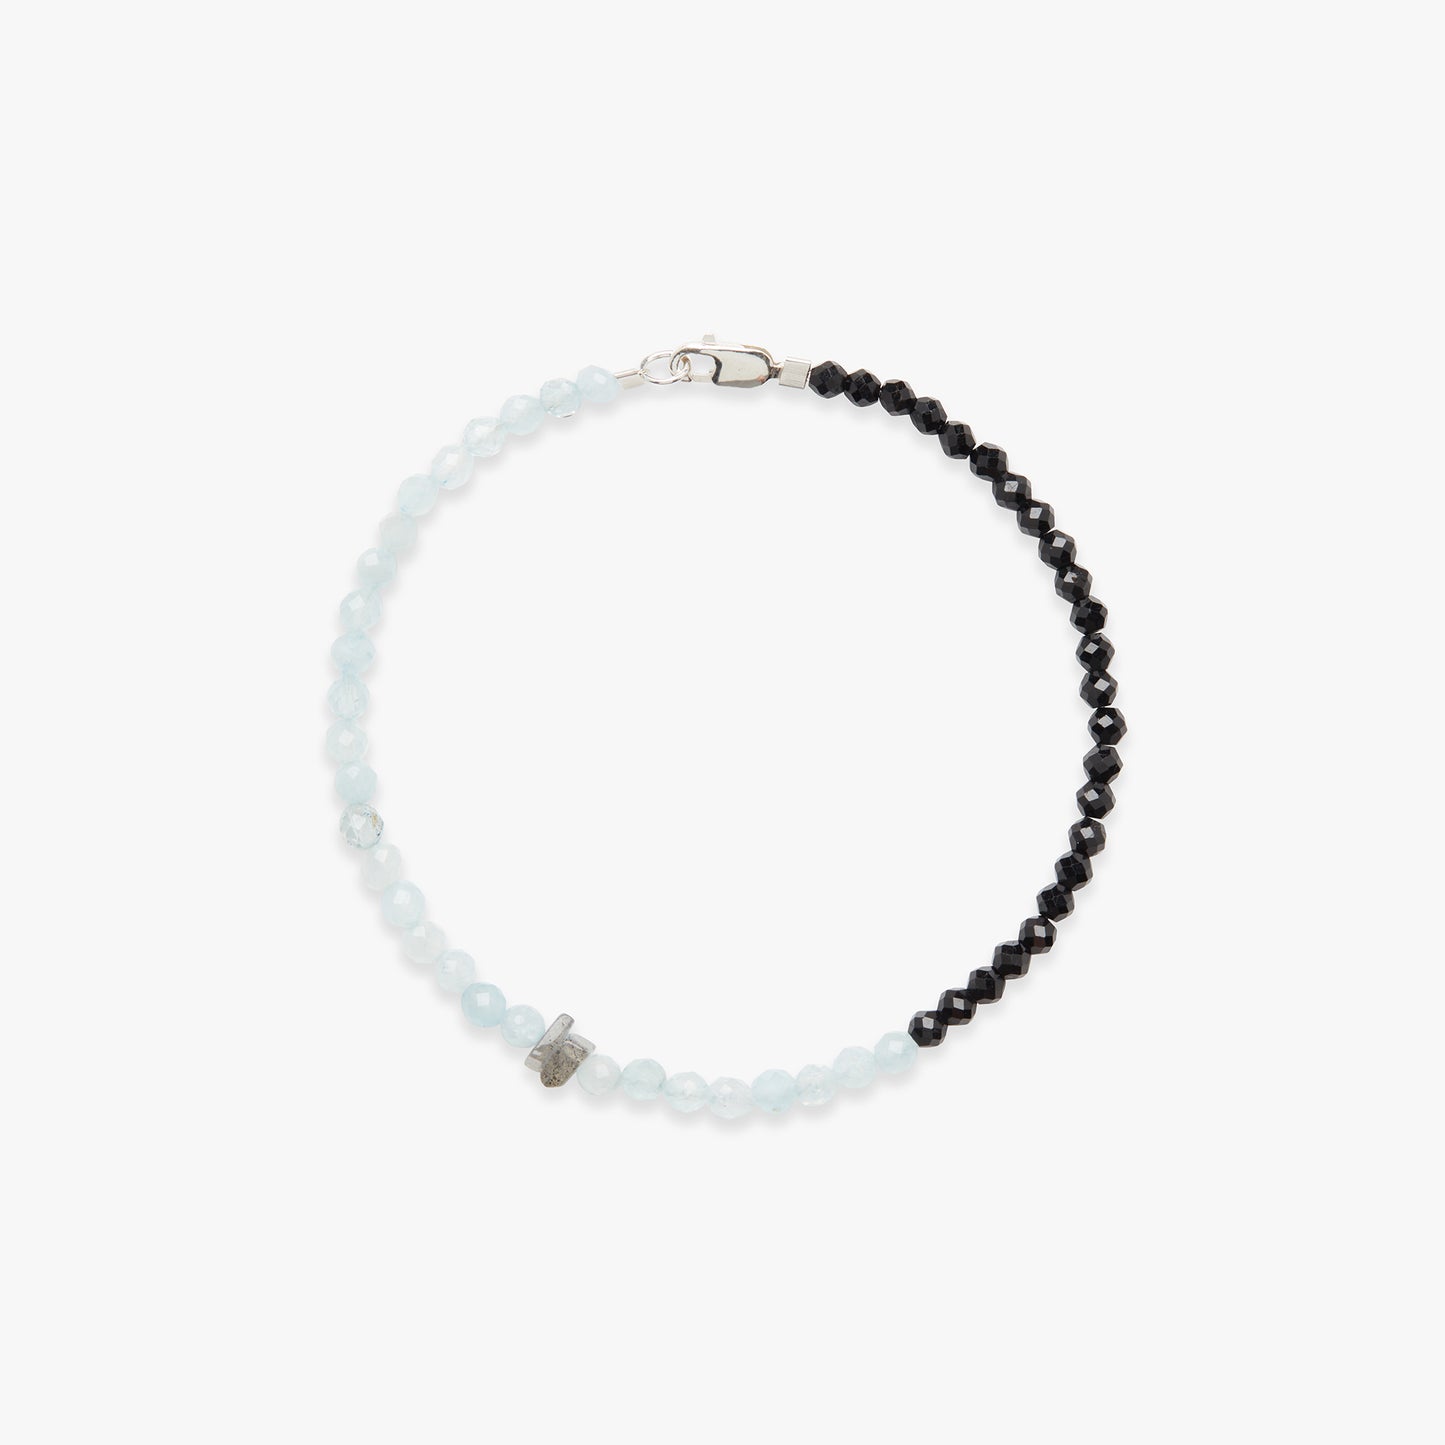 Once in a Blue Moon zwarte spinel armband zilver